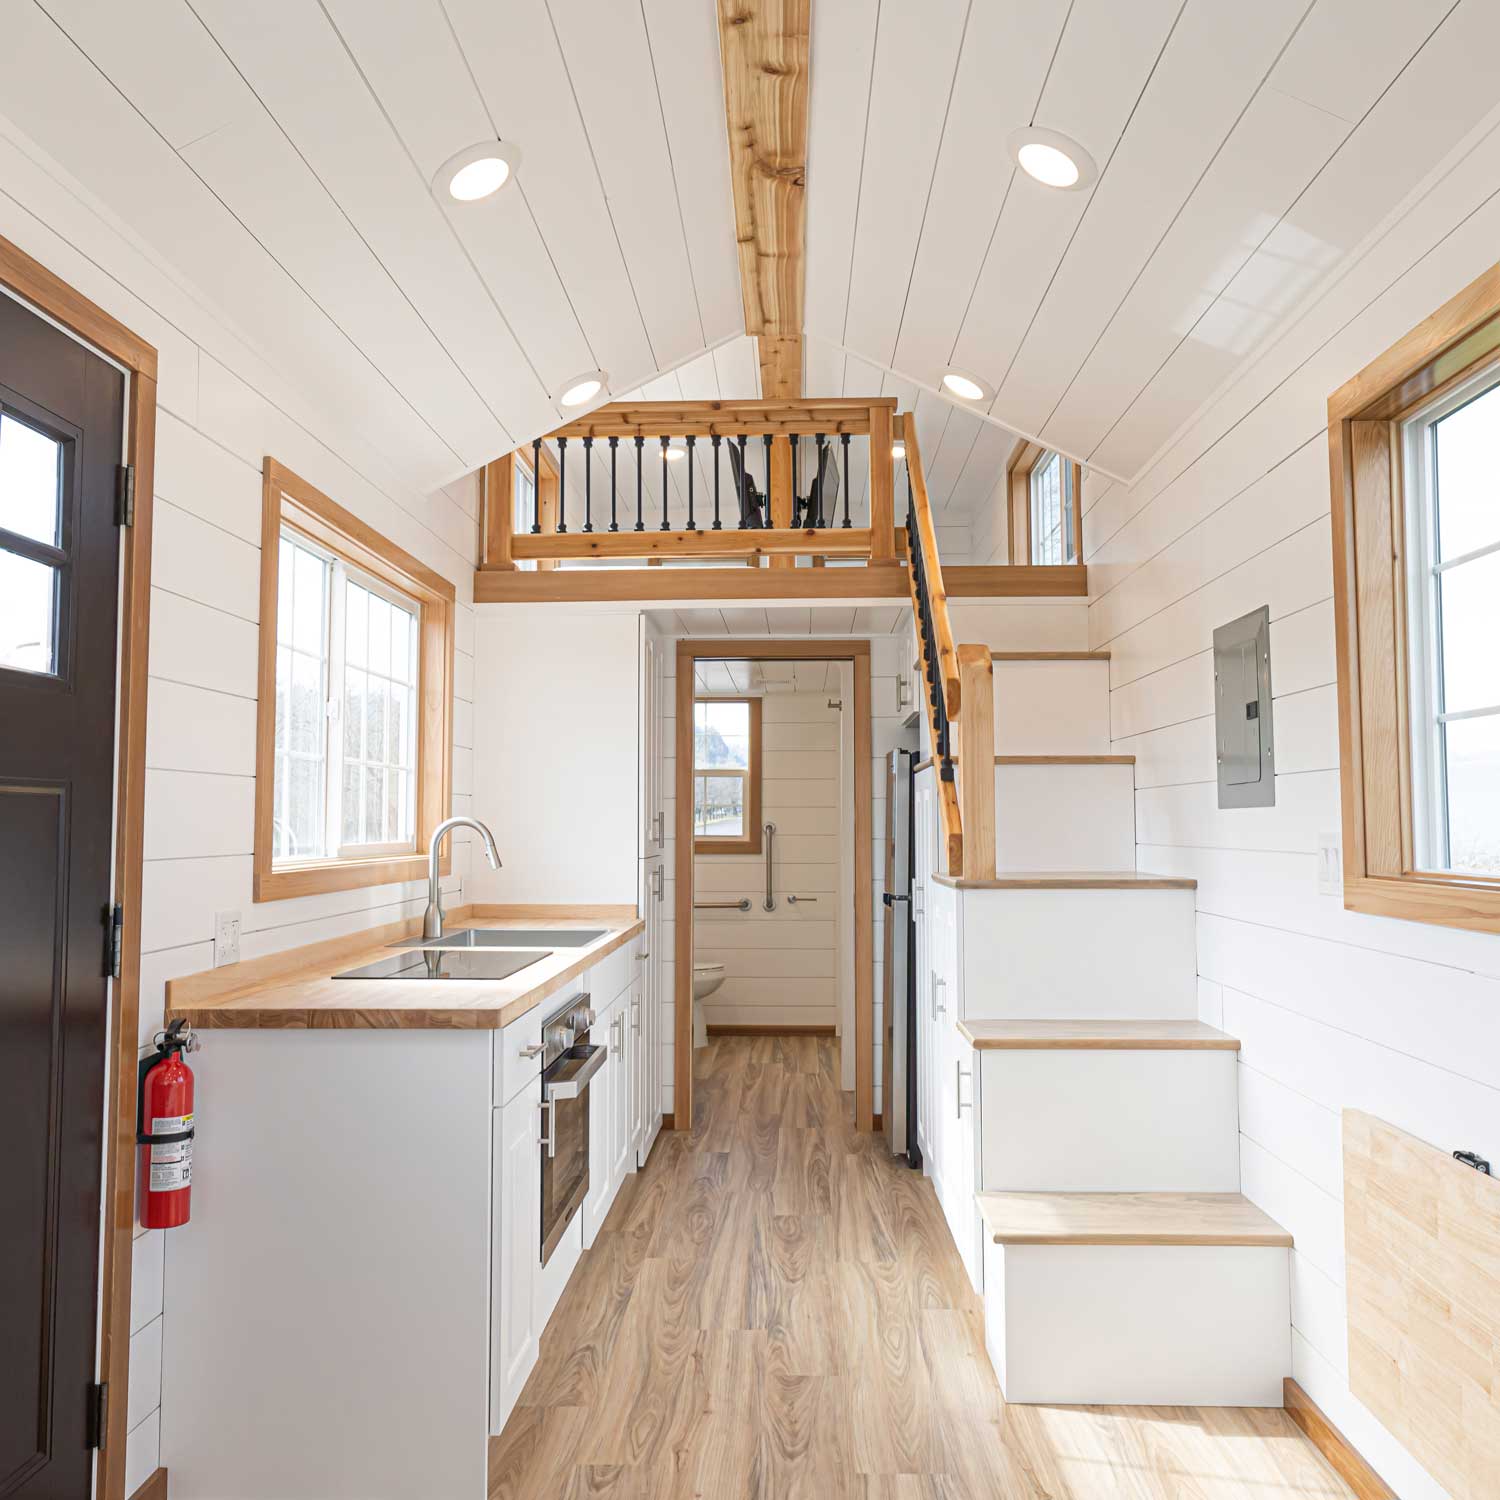 Heritage tiny home in the craftsman style, showing the interior with loft and kitchen